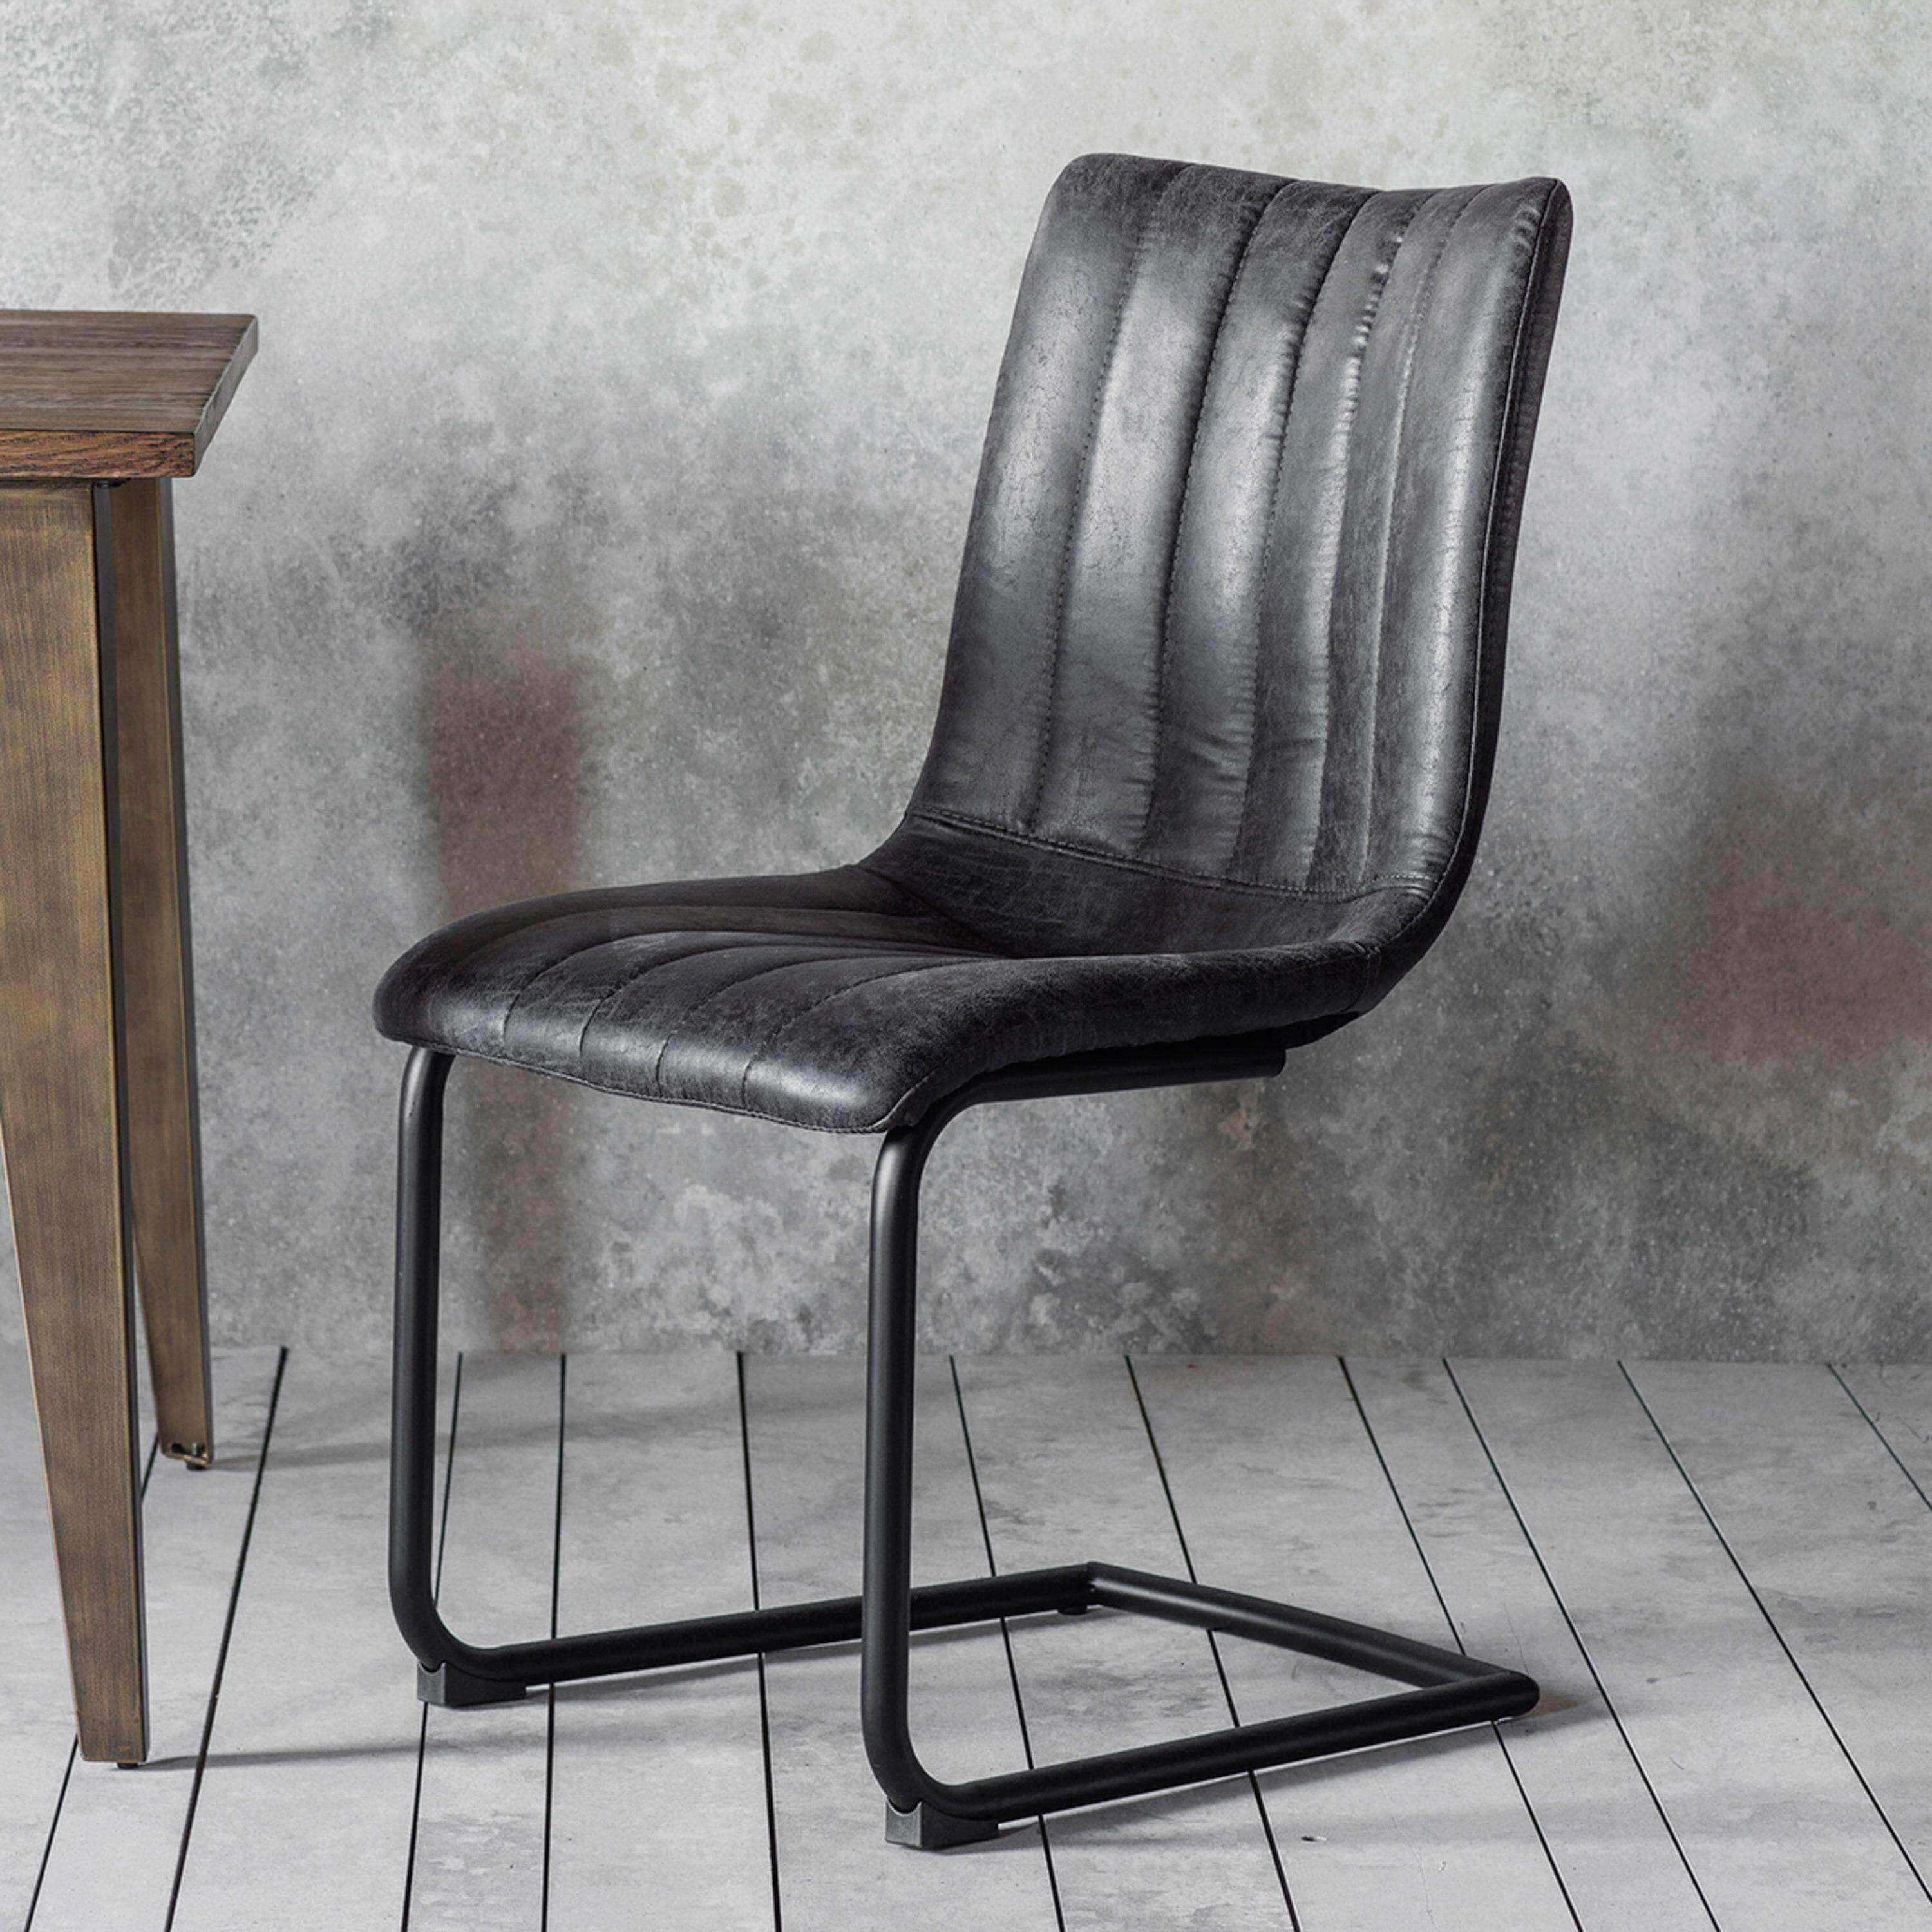 Set of Two Cantilever Aged Faux Dark Leather Dining Chairs - The Farthing